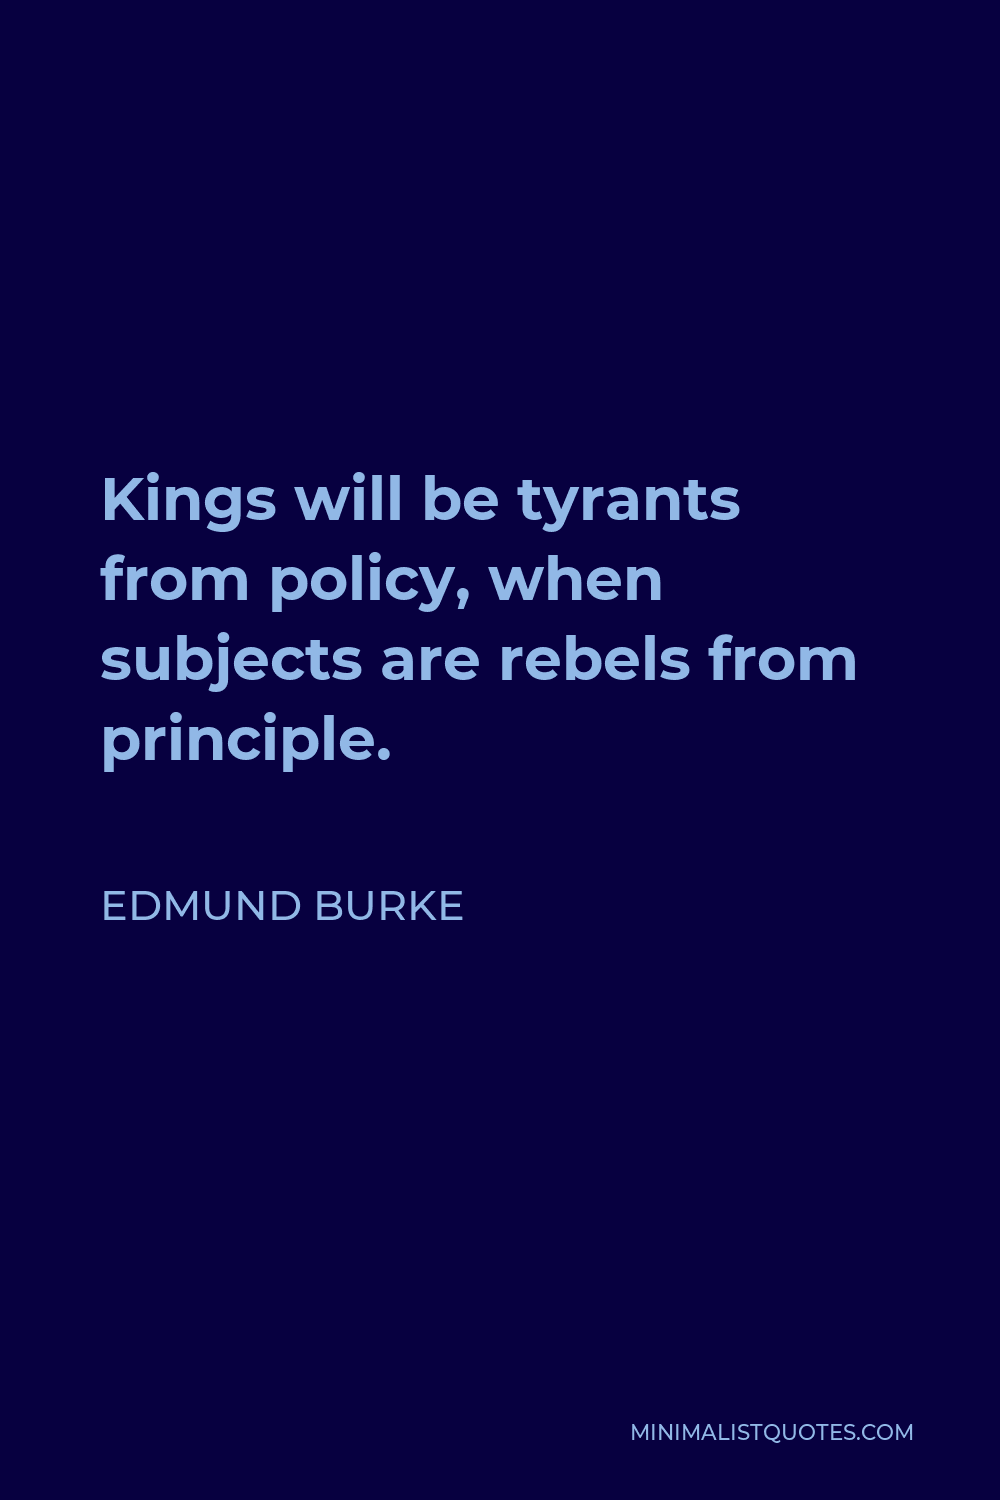 Edmund Burke Quote - Kings will be tyrants from policy, when subjects are rebels from principle.